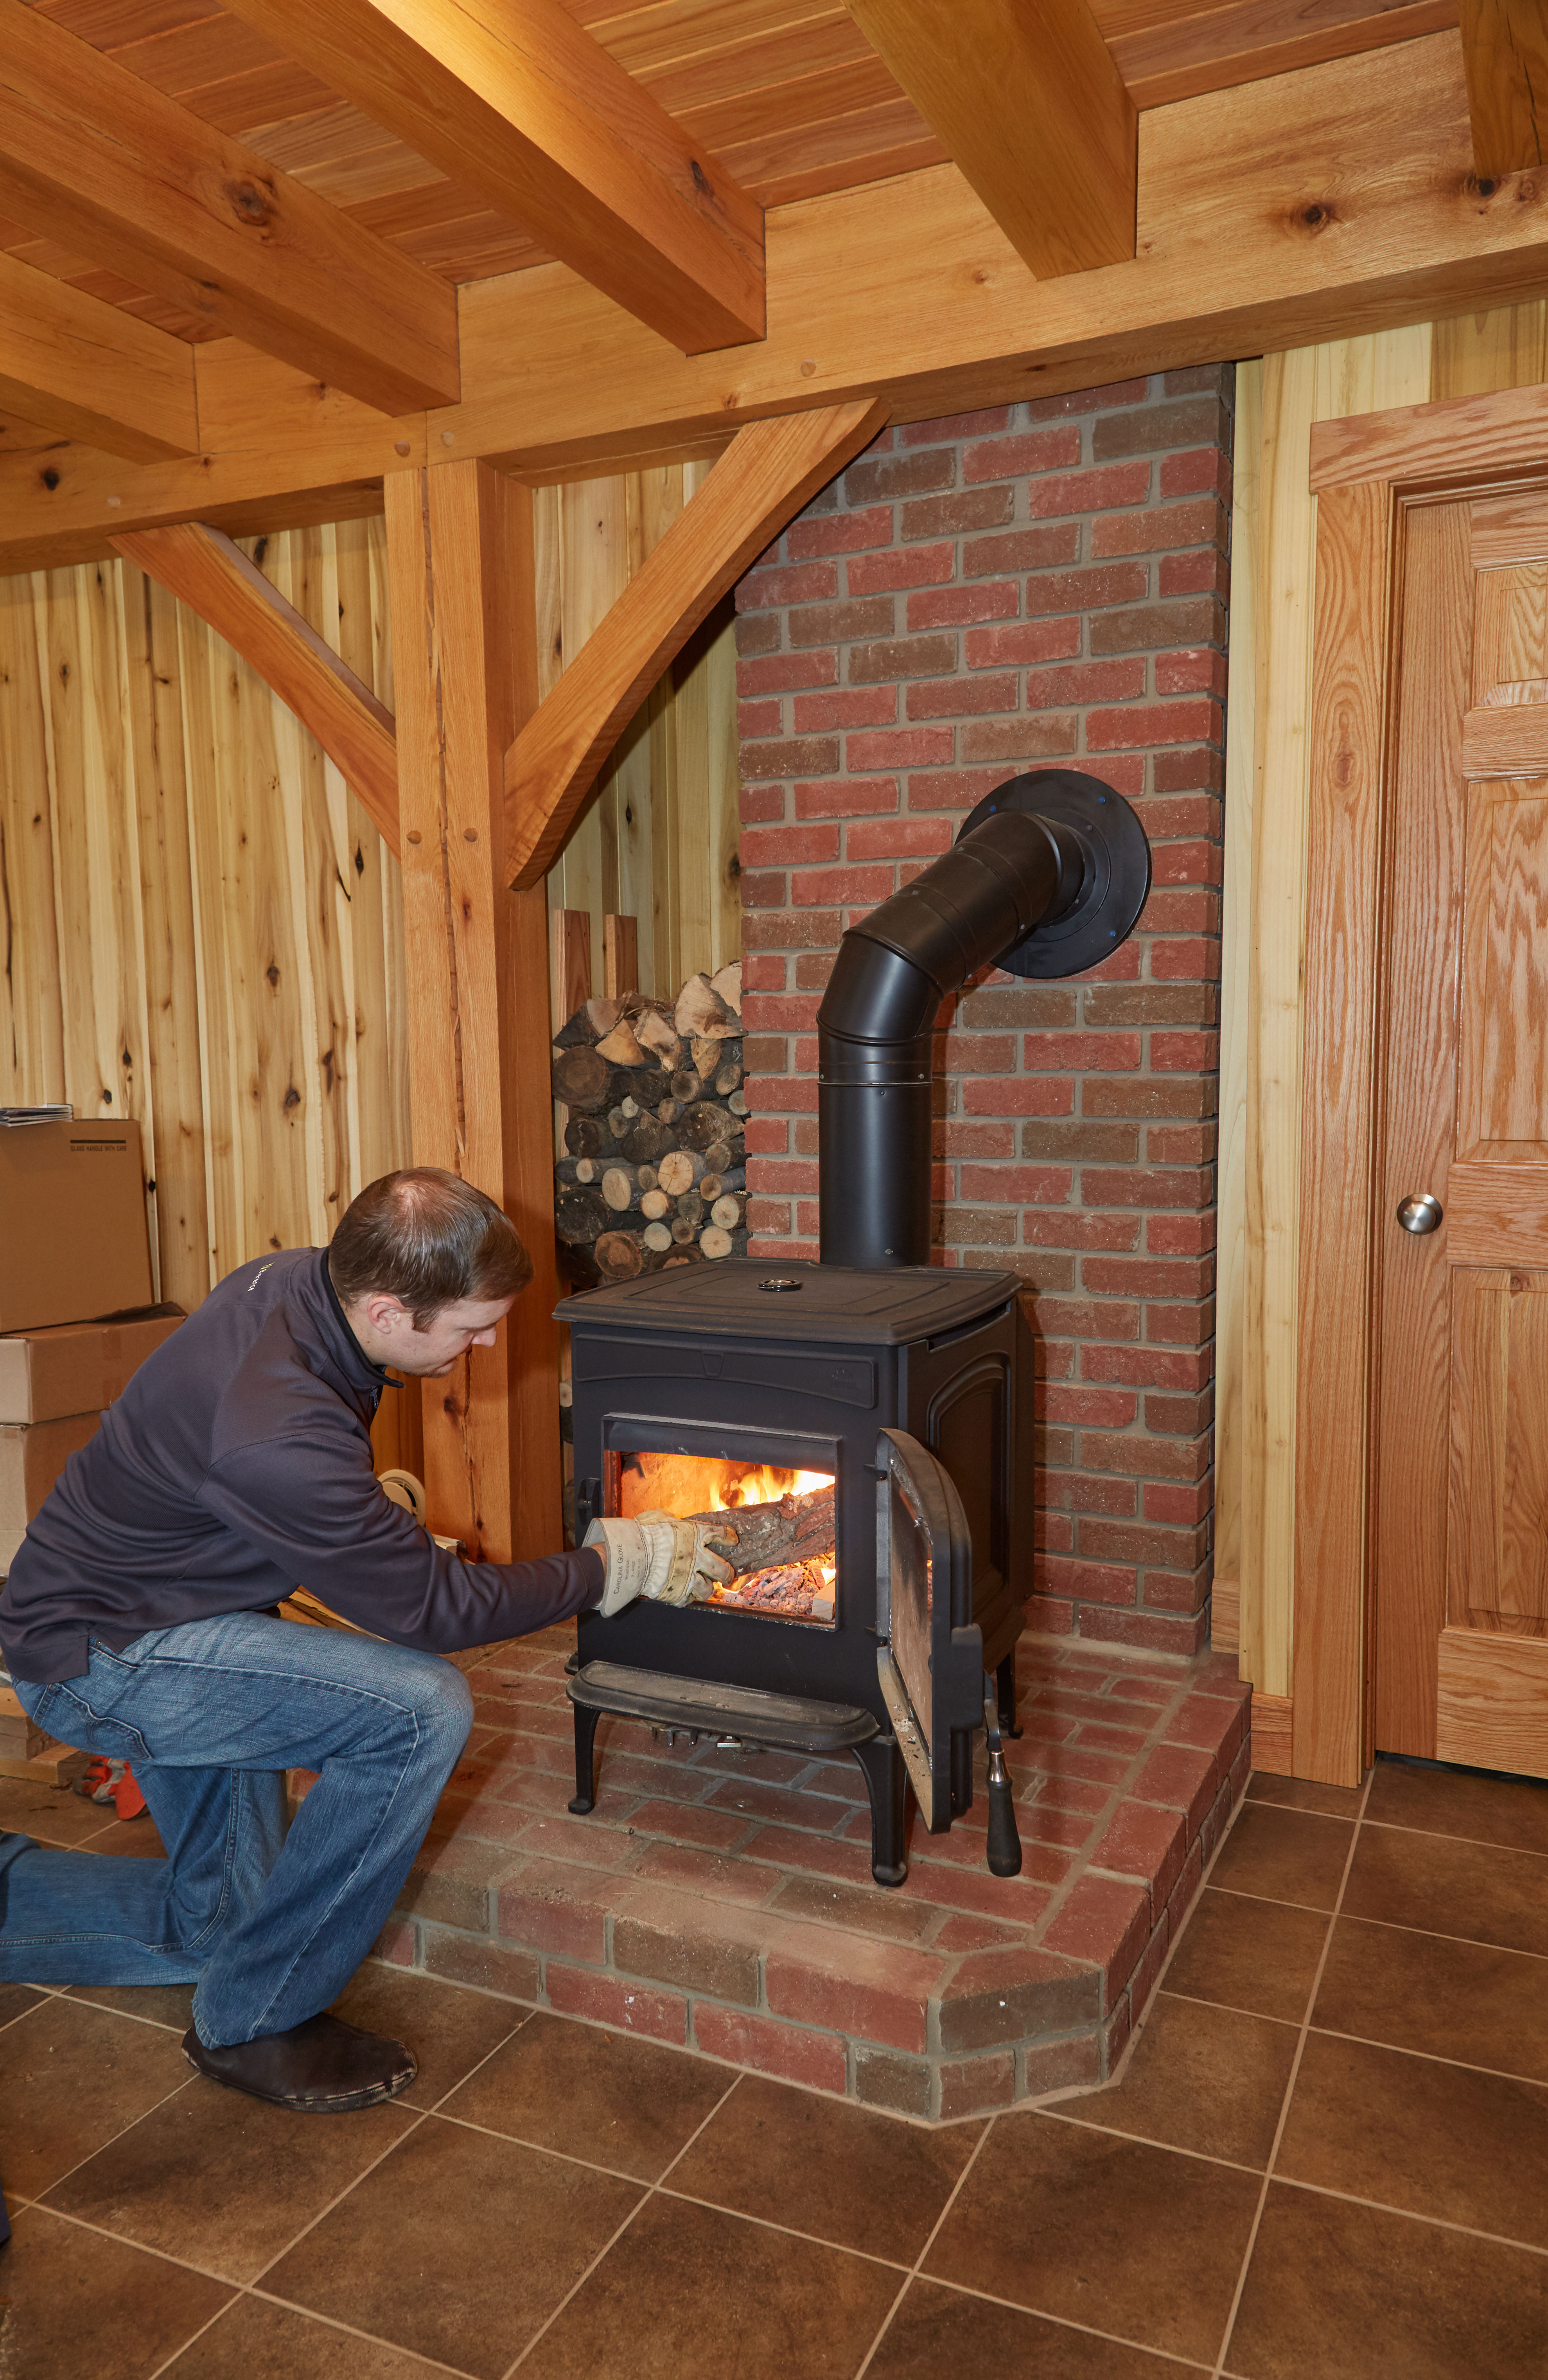 Attending the wood stove at the Meyer family house